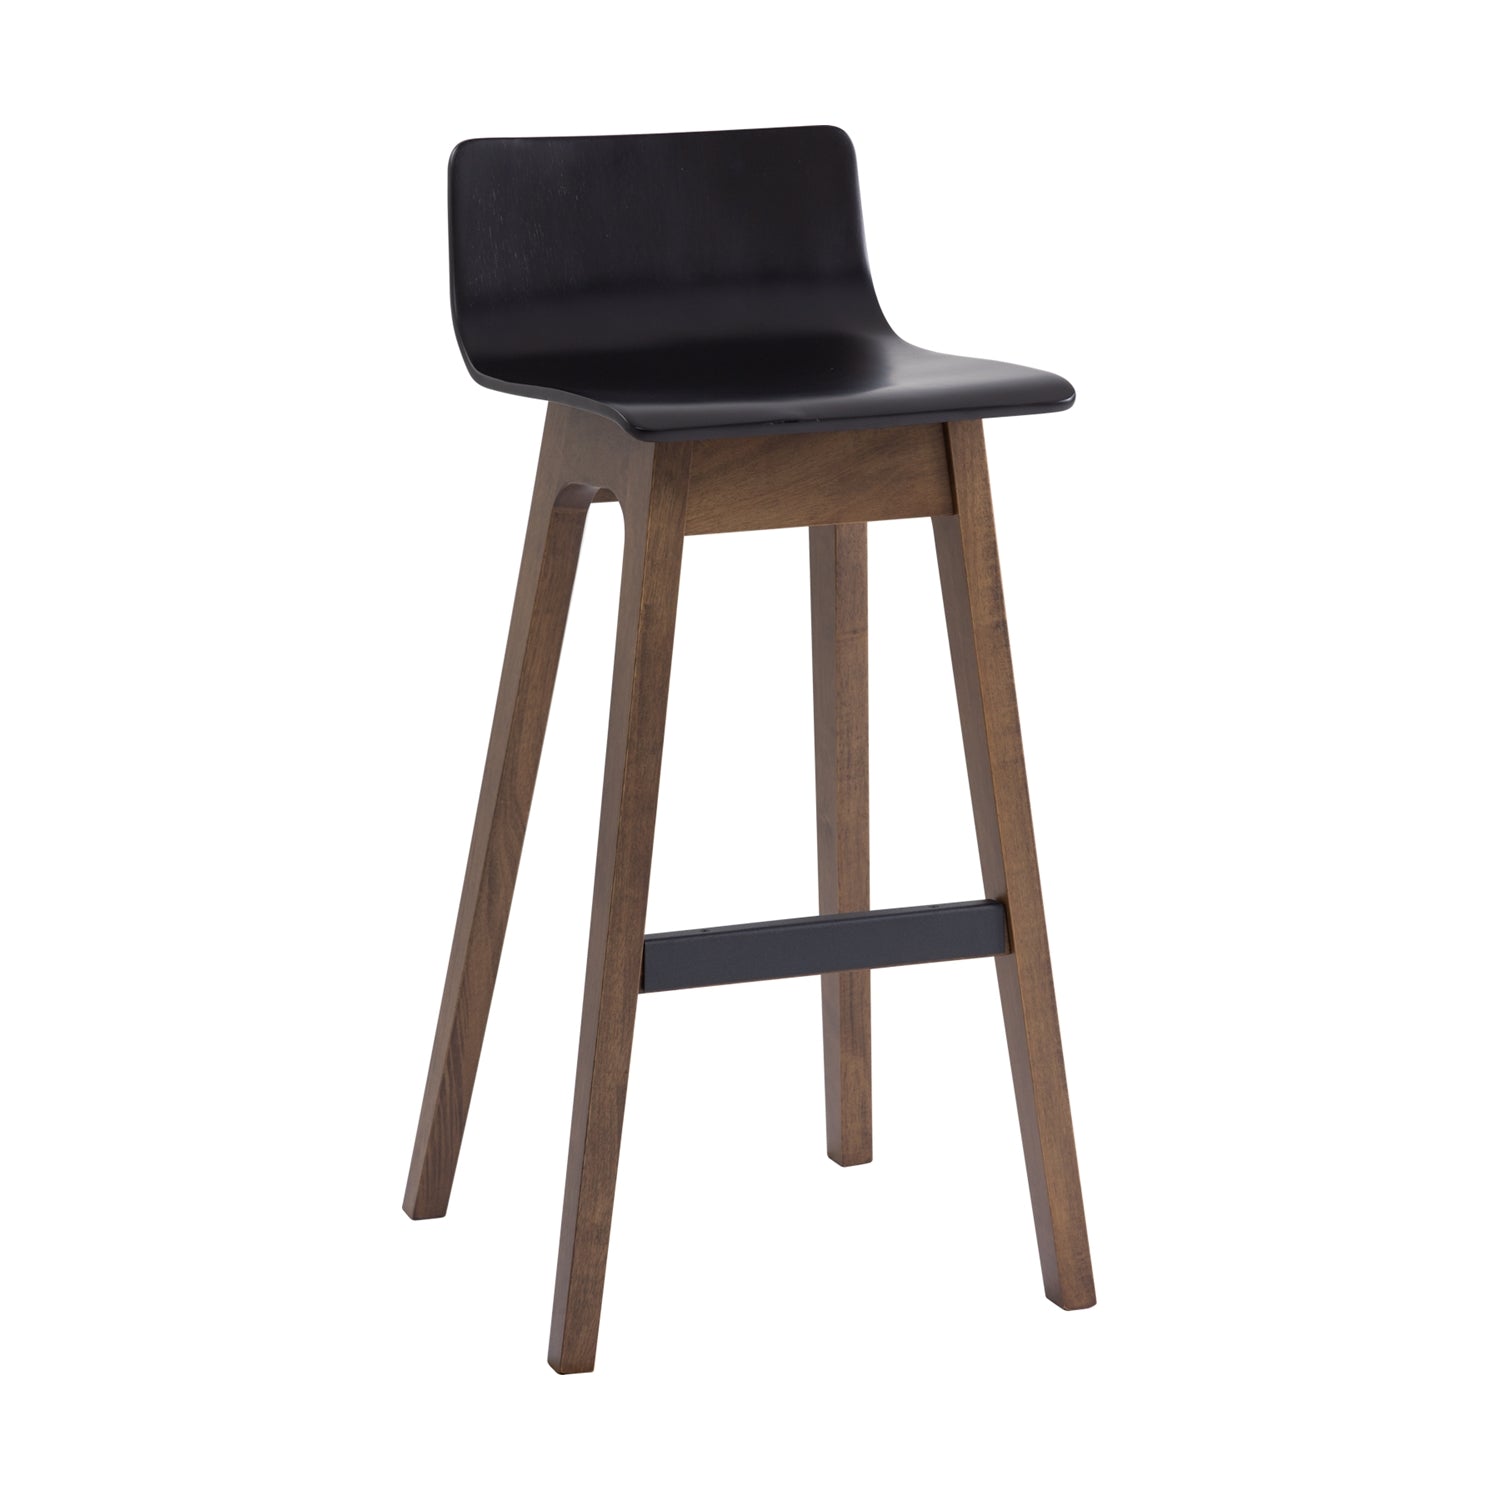 Ava Low Back Bar Chair - Black & Cocoa